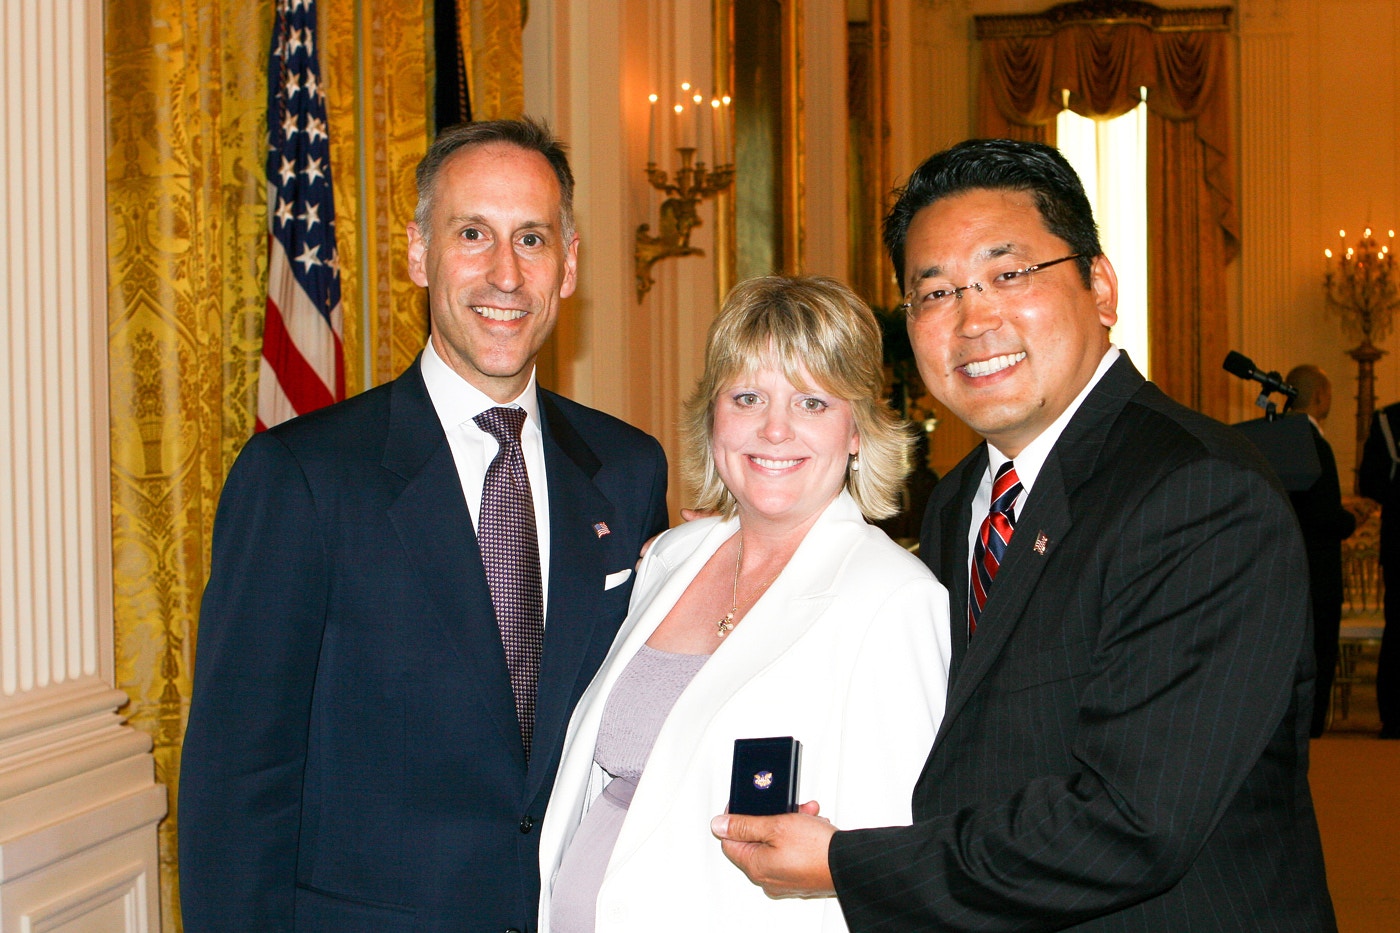 Jack Hawkins, Director of Volunteers for Prosperity (USAID) at the White House celebration of Asian Pacific Heritage Month.Kay Hiramine of Colorado Springs, Colo., recipient of the President's Volunteer Service award and Volunteers for Prosperity participant.